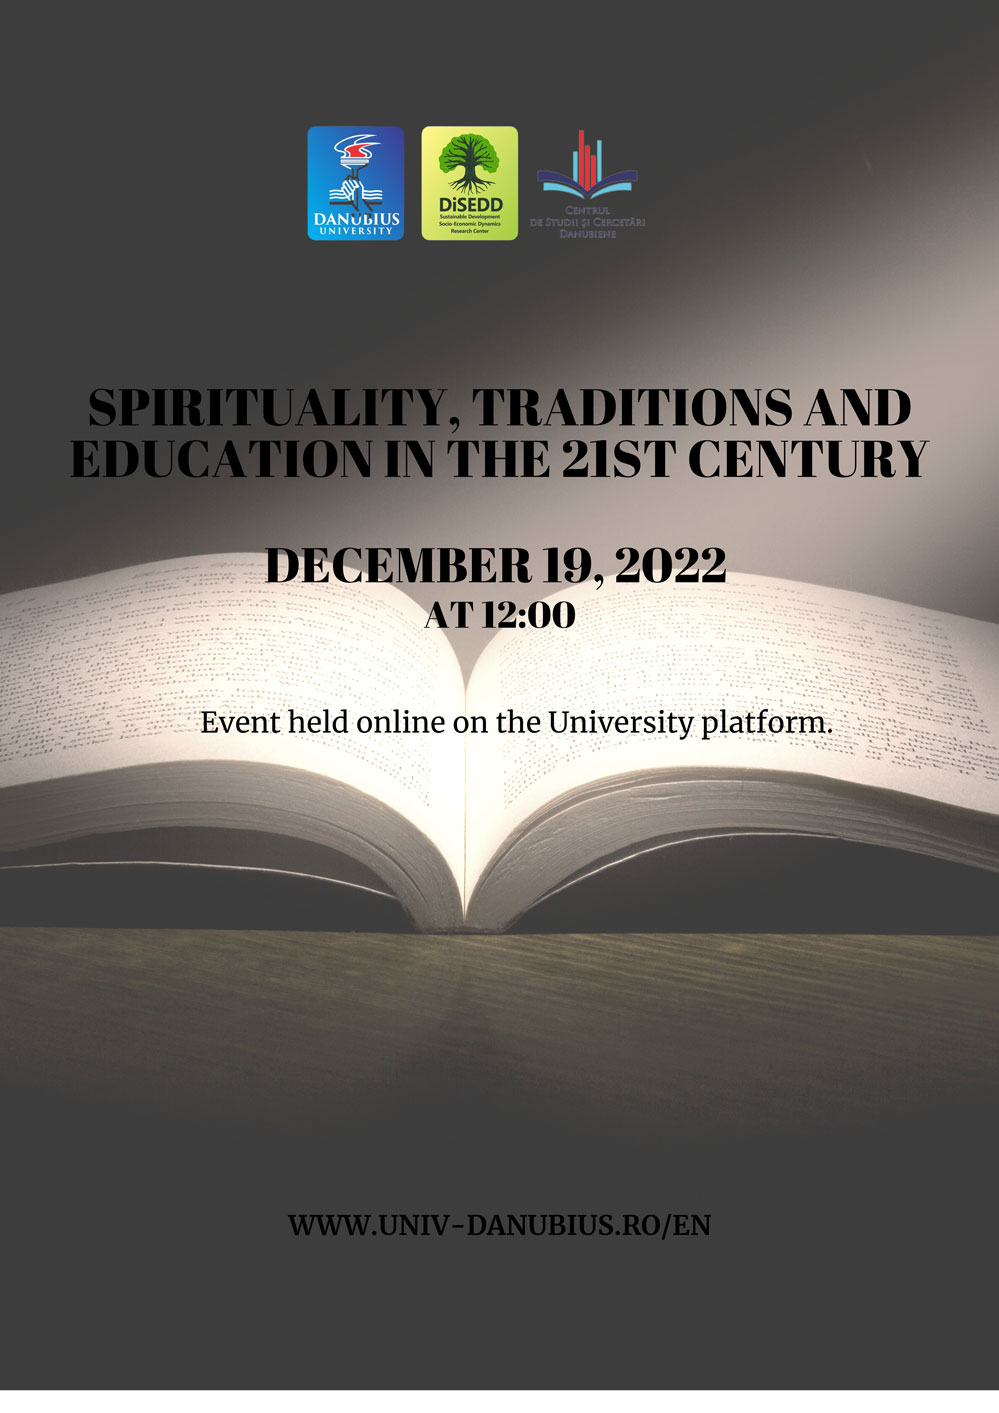 WORKSHOP - SPIRITUALITY, TRADITIONS AND EDUCATION IN THE 21ST CENTURY